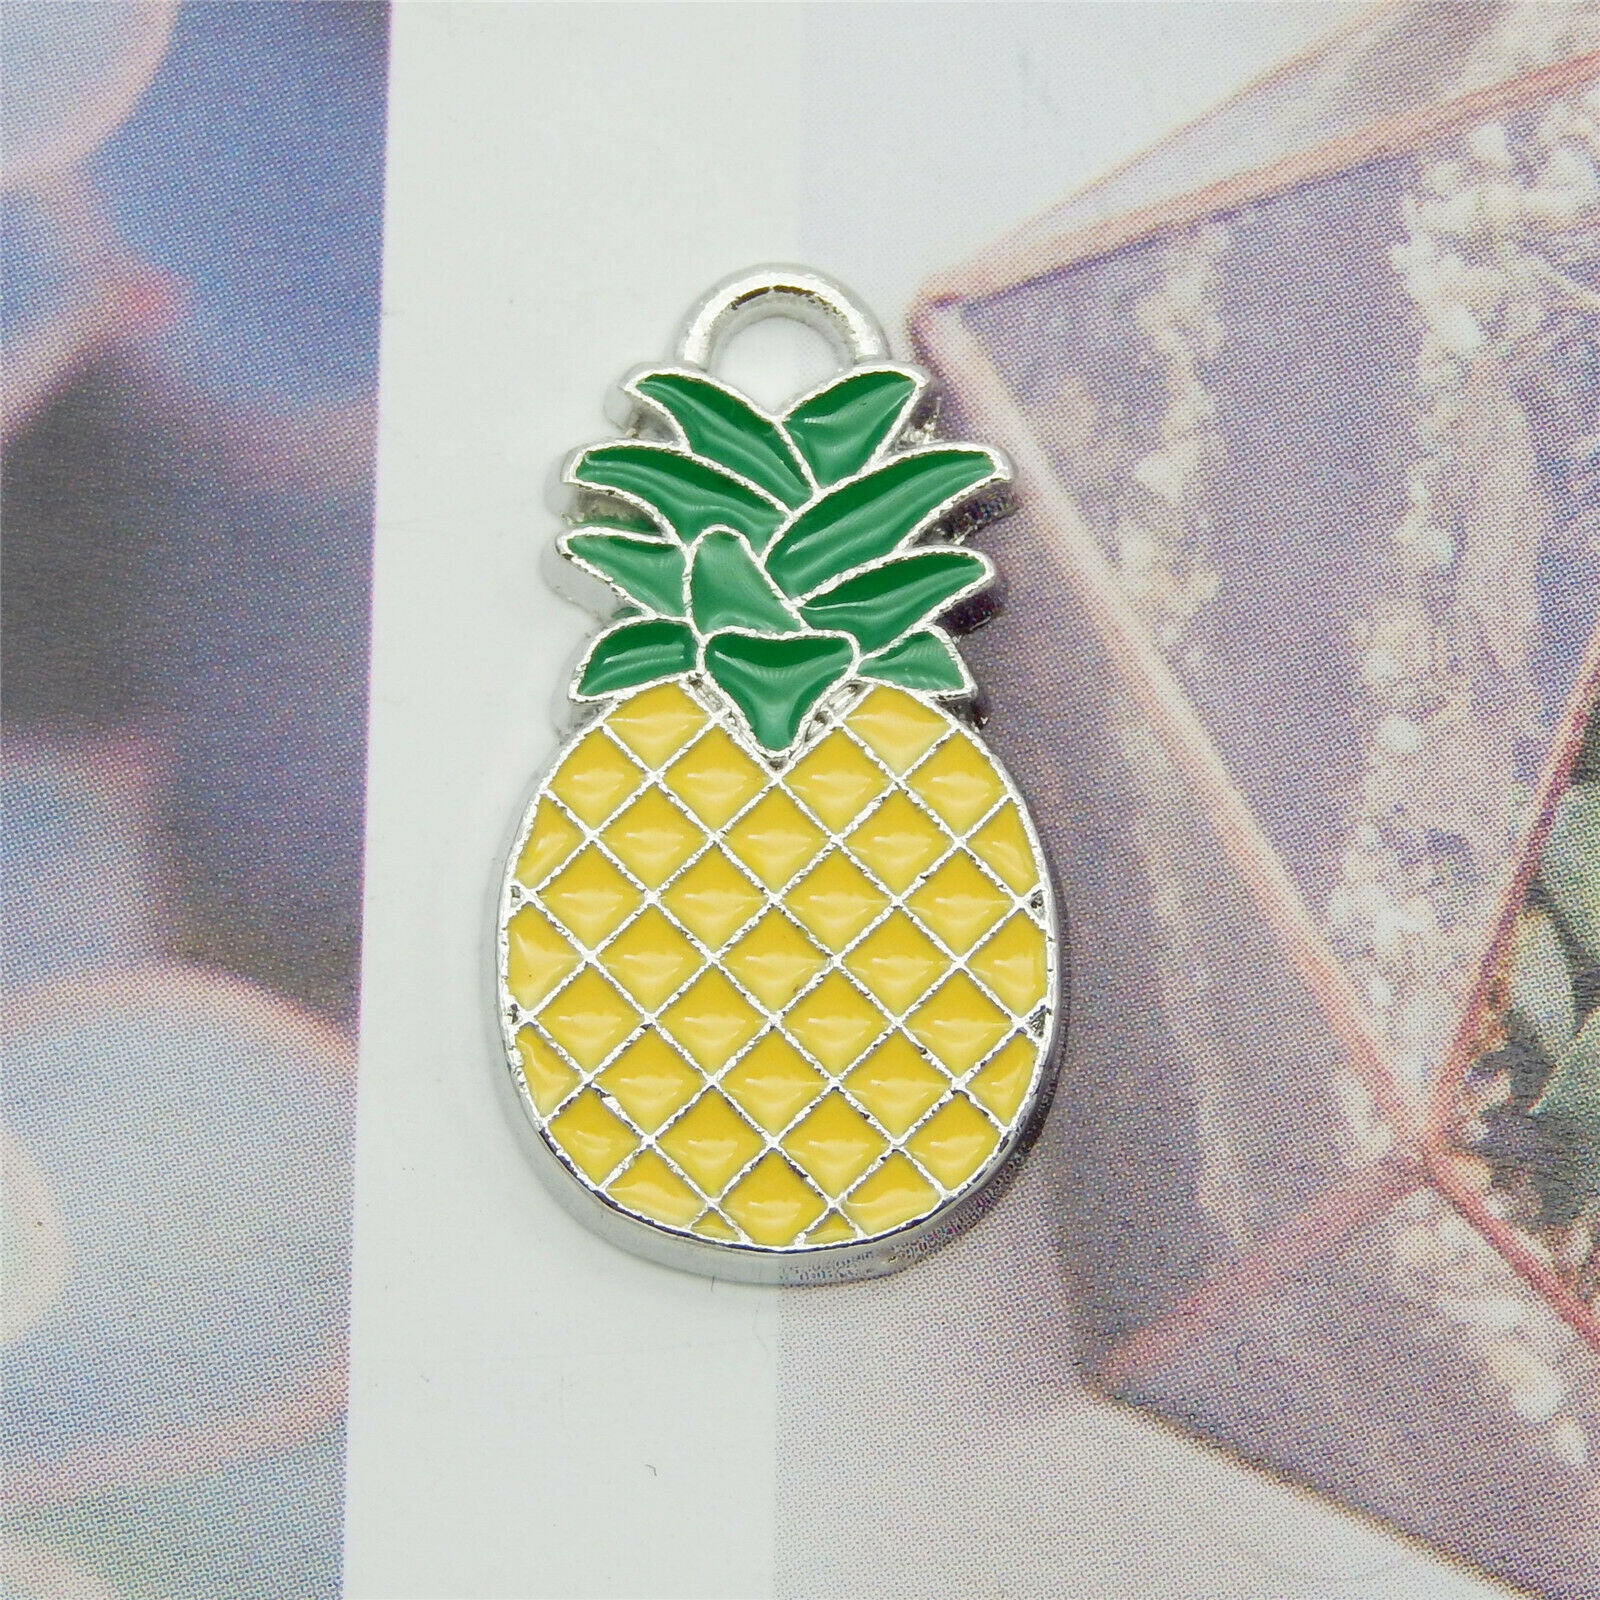 Wholesale Alloy Yellow Pineapple Design Pendant Charms Jewelry DIY Crafts 15pcs